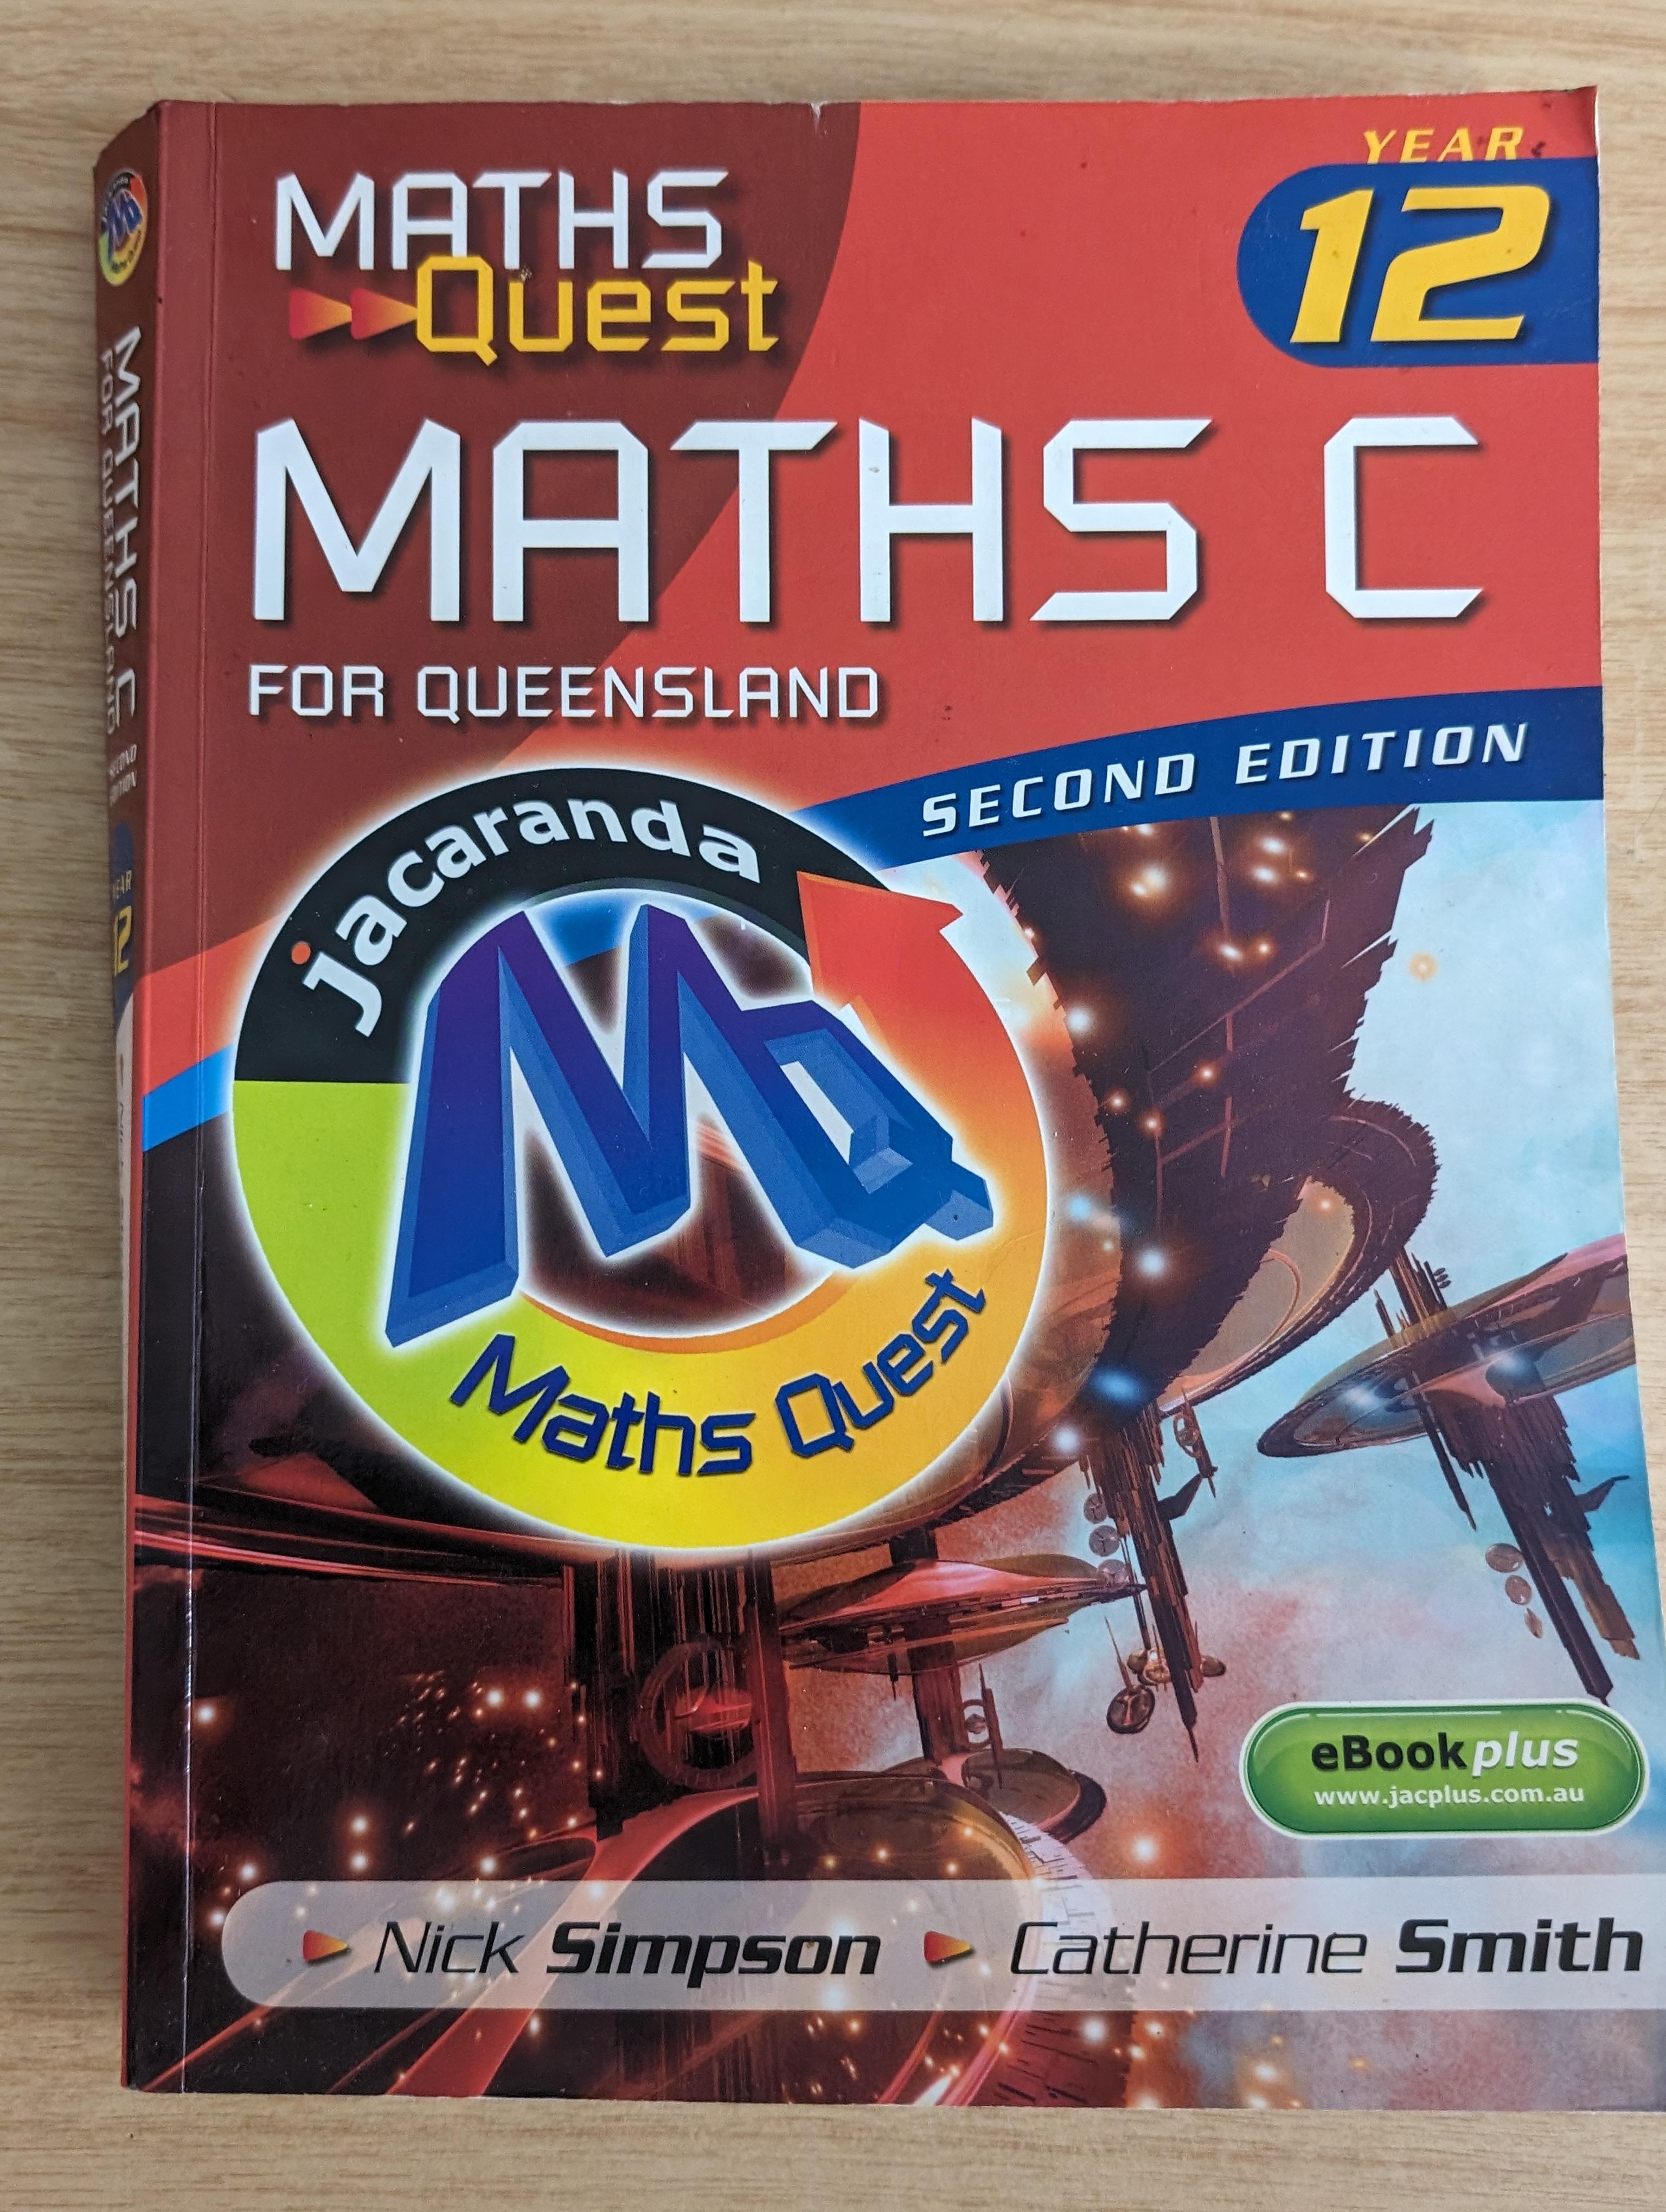 One to One Maths Tutoring Griffin 0420 287 051